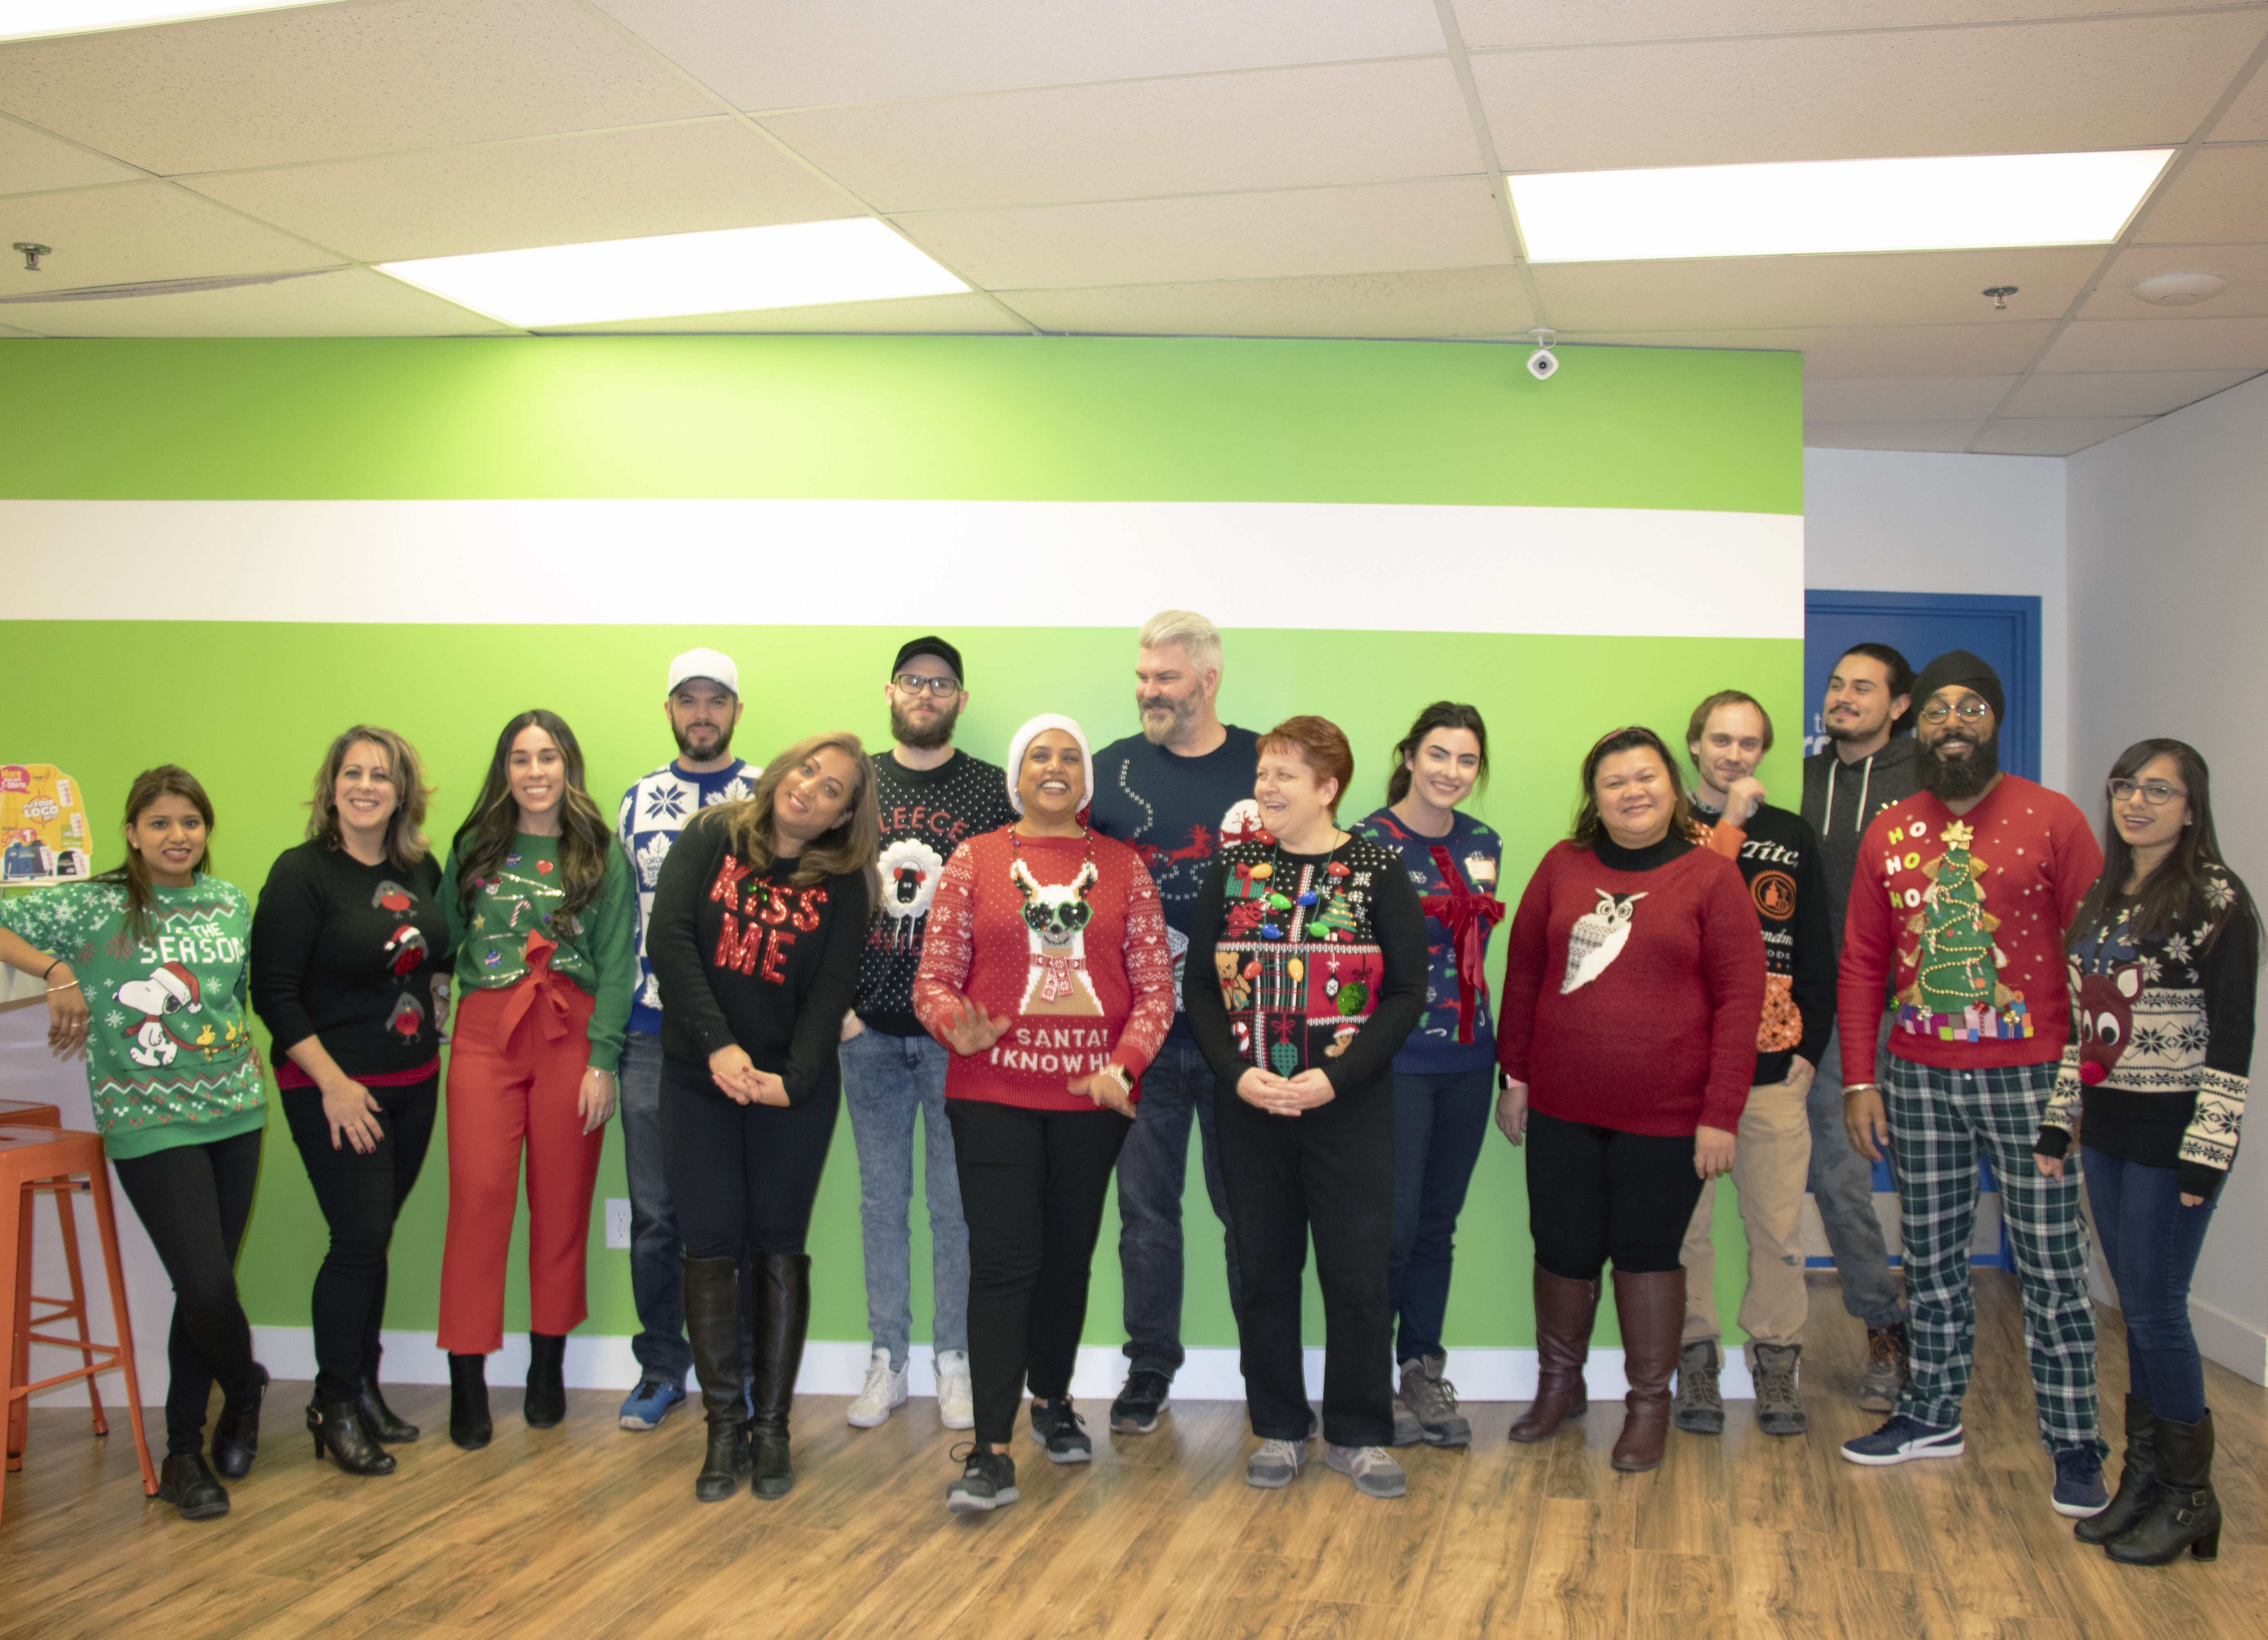 Entripy employees wearing christmas sweaters for ugly sweater contest.